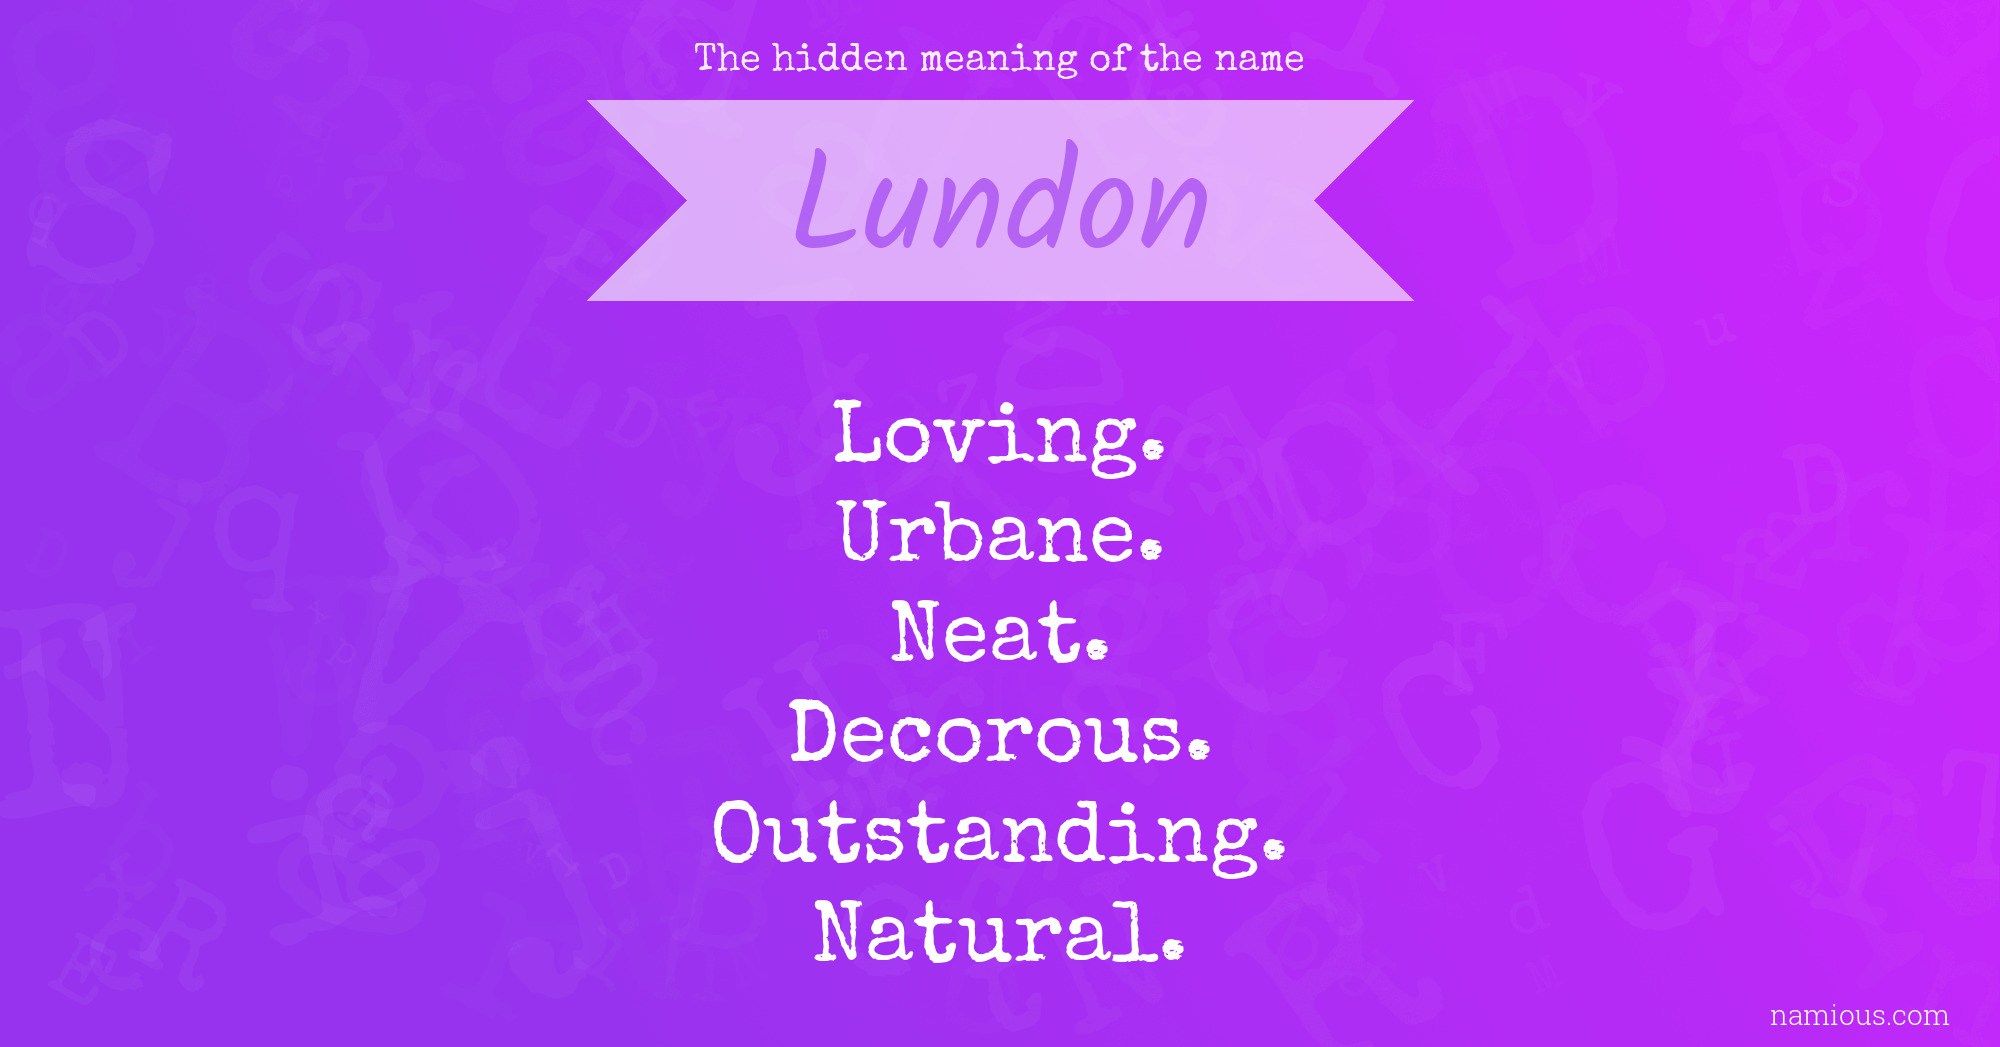 The hidden meaning of the name Lundon